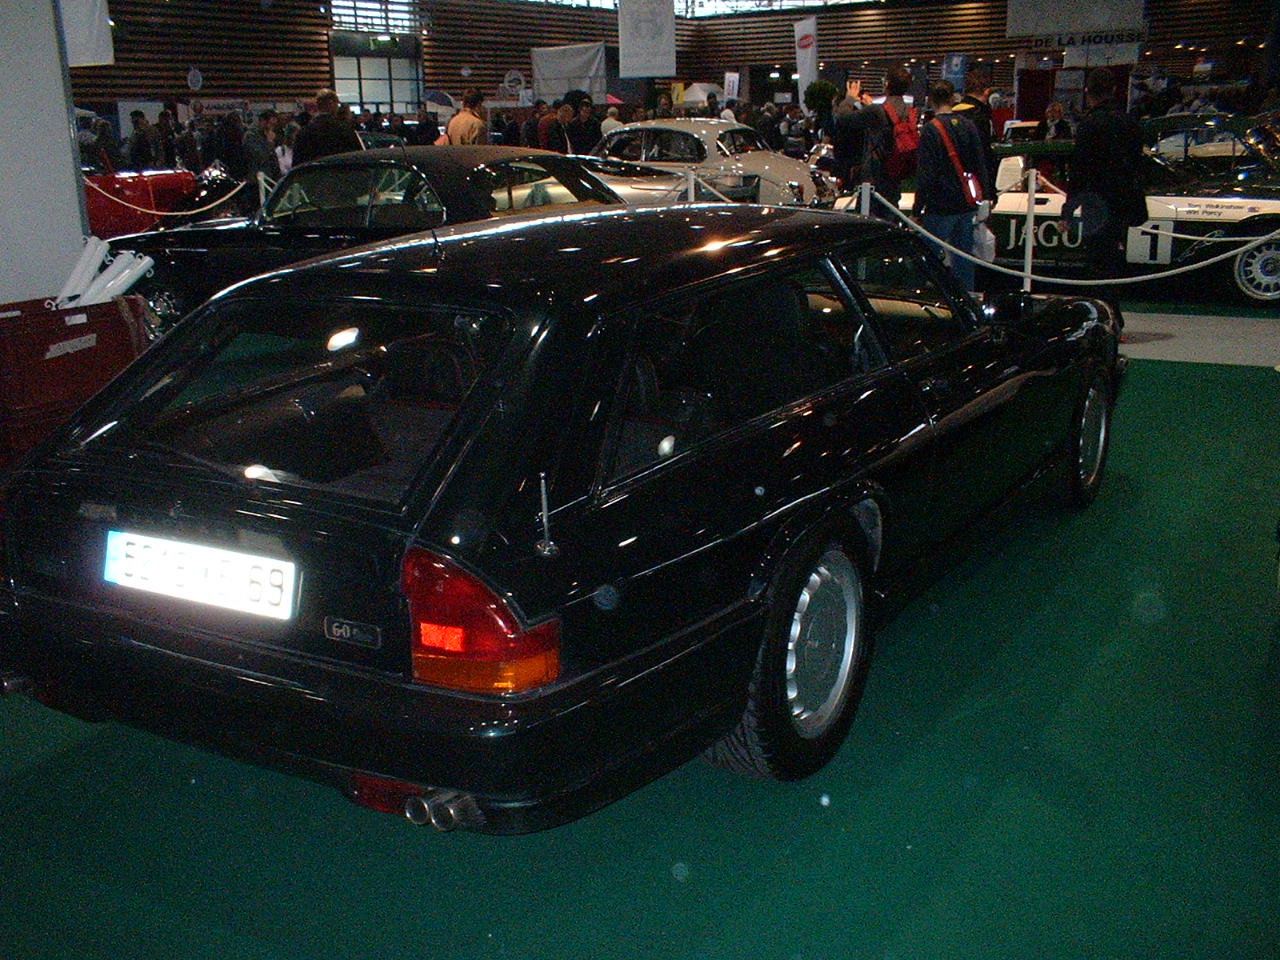  Eventer n°57 XJR-S - Page 2 111106090710500089014633